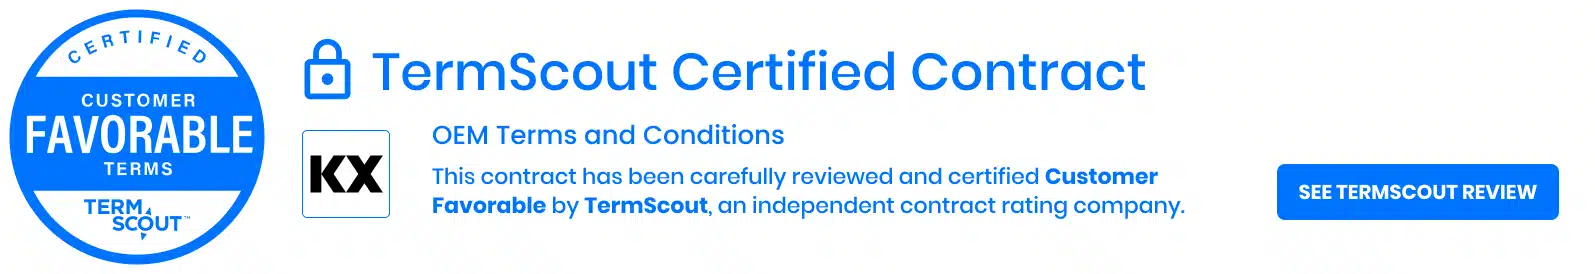 Termscout Certificate for OEM Terms and Conditions - KX